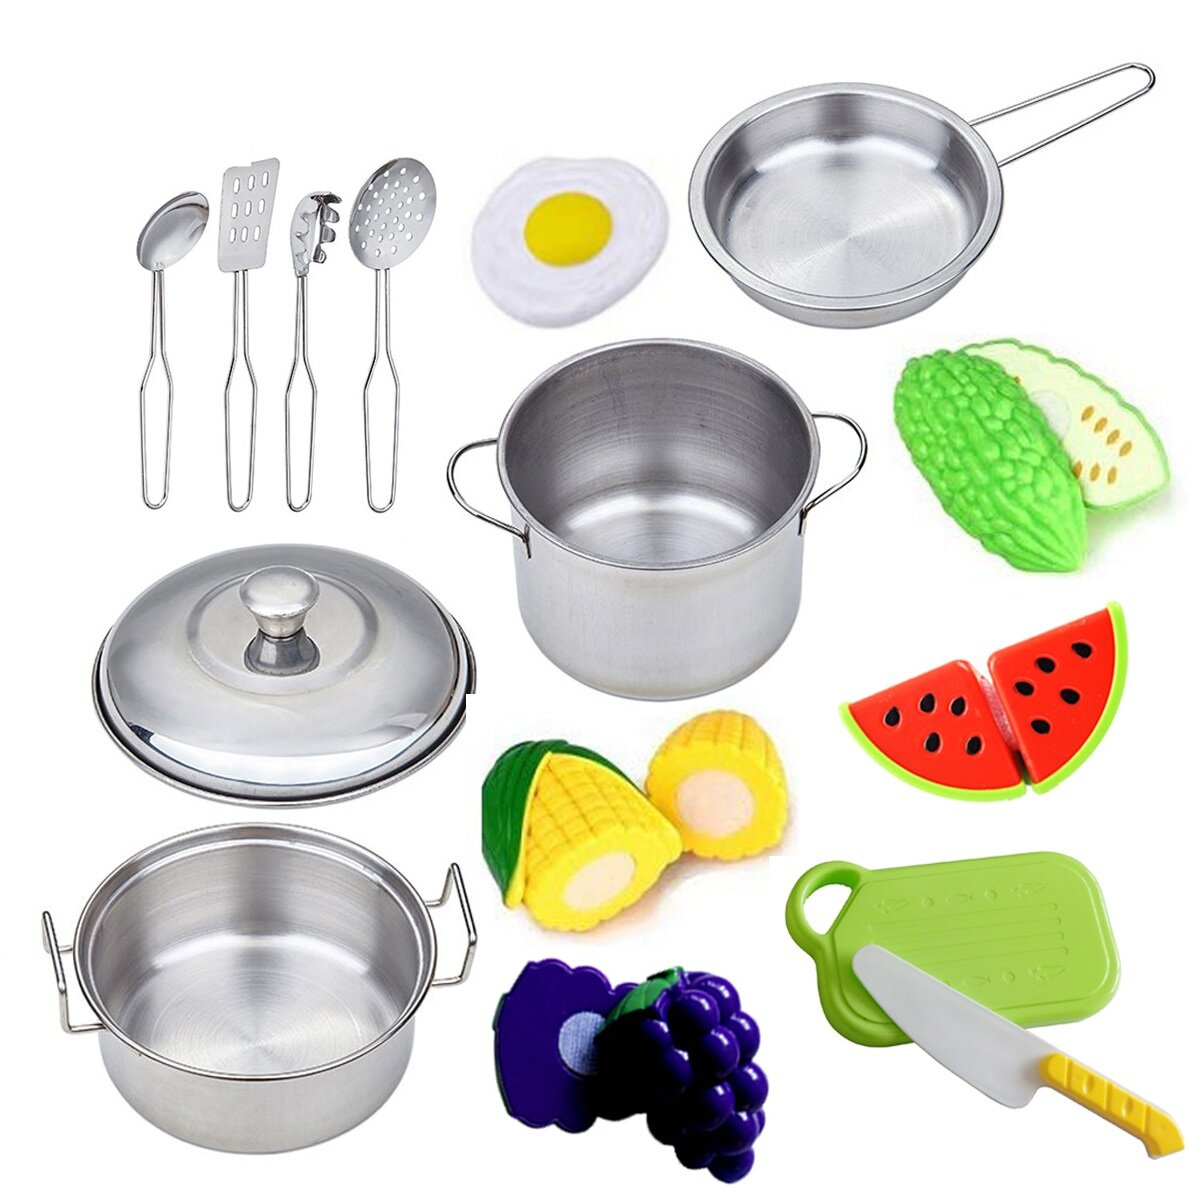 15Pieces Children Mini Kitchen Toy Cookware Pot Pan Kids Cook Play Toy Simulation Kitchen Utensils for Toys Children Gif